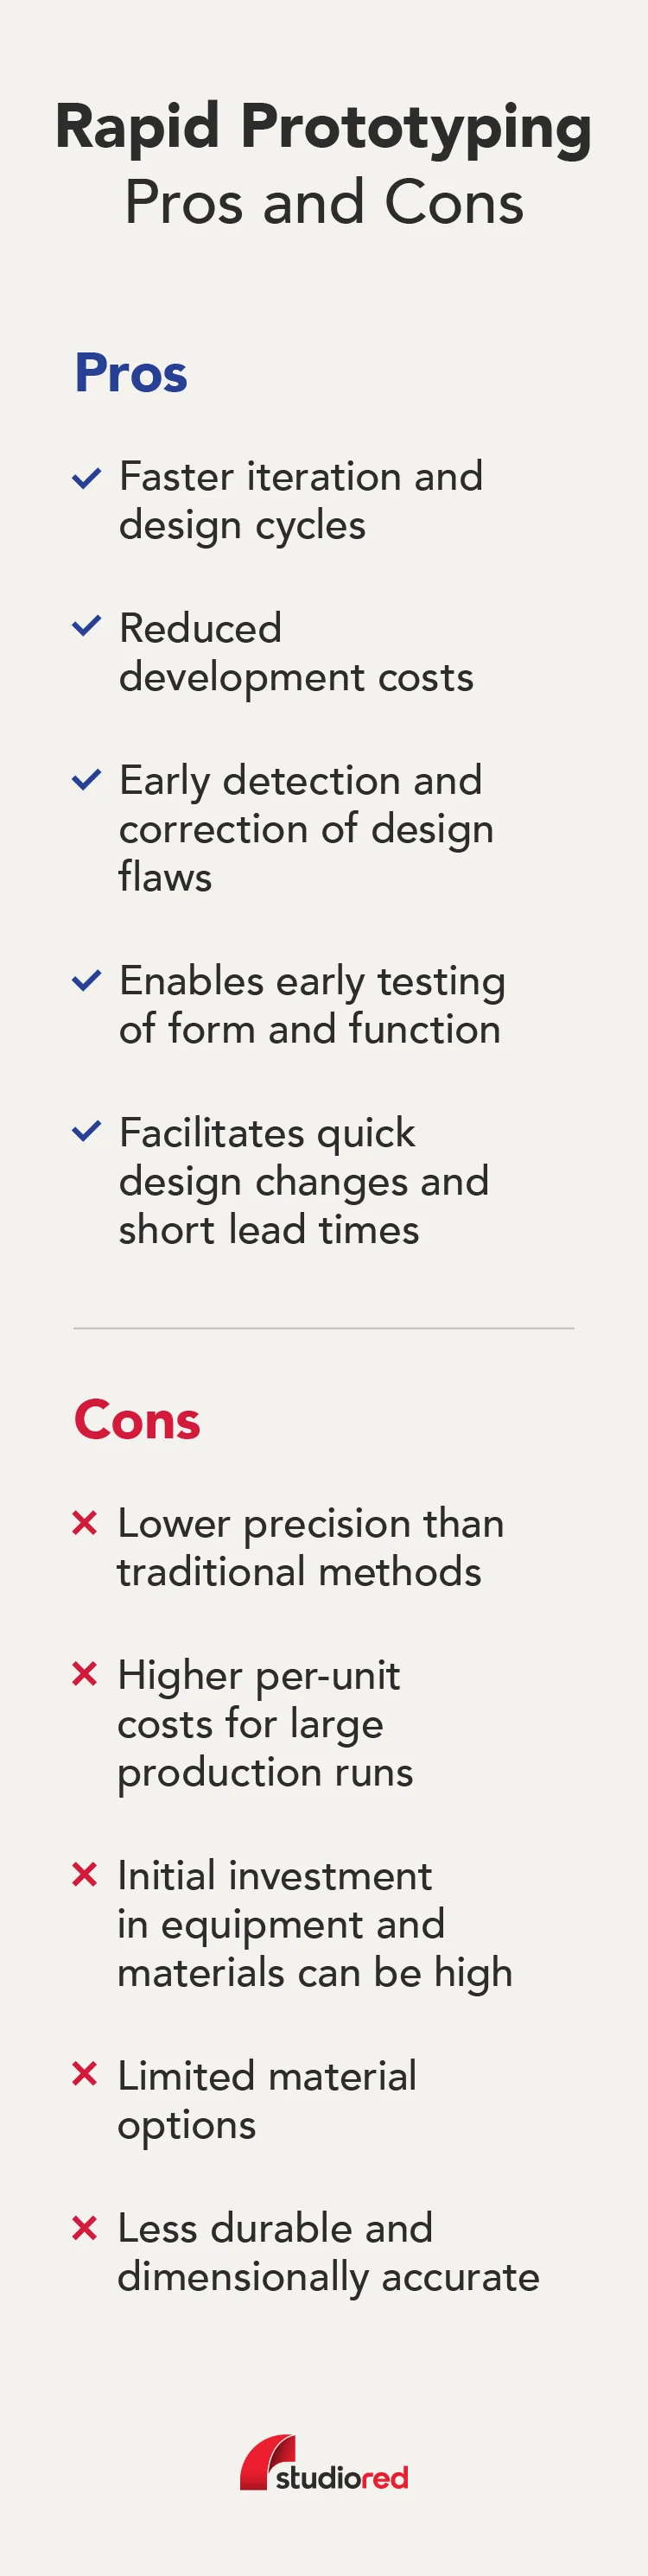 Graphic listing pros and cons of rapid prototyping. Pros include faster iteration, reduced costs, early design flaw detection, and quick design changes. Cons include lower precision, higher costs for large runs, high initial investments, limited material options, and less durability.